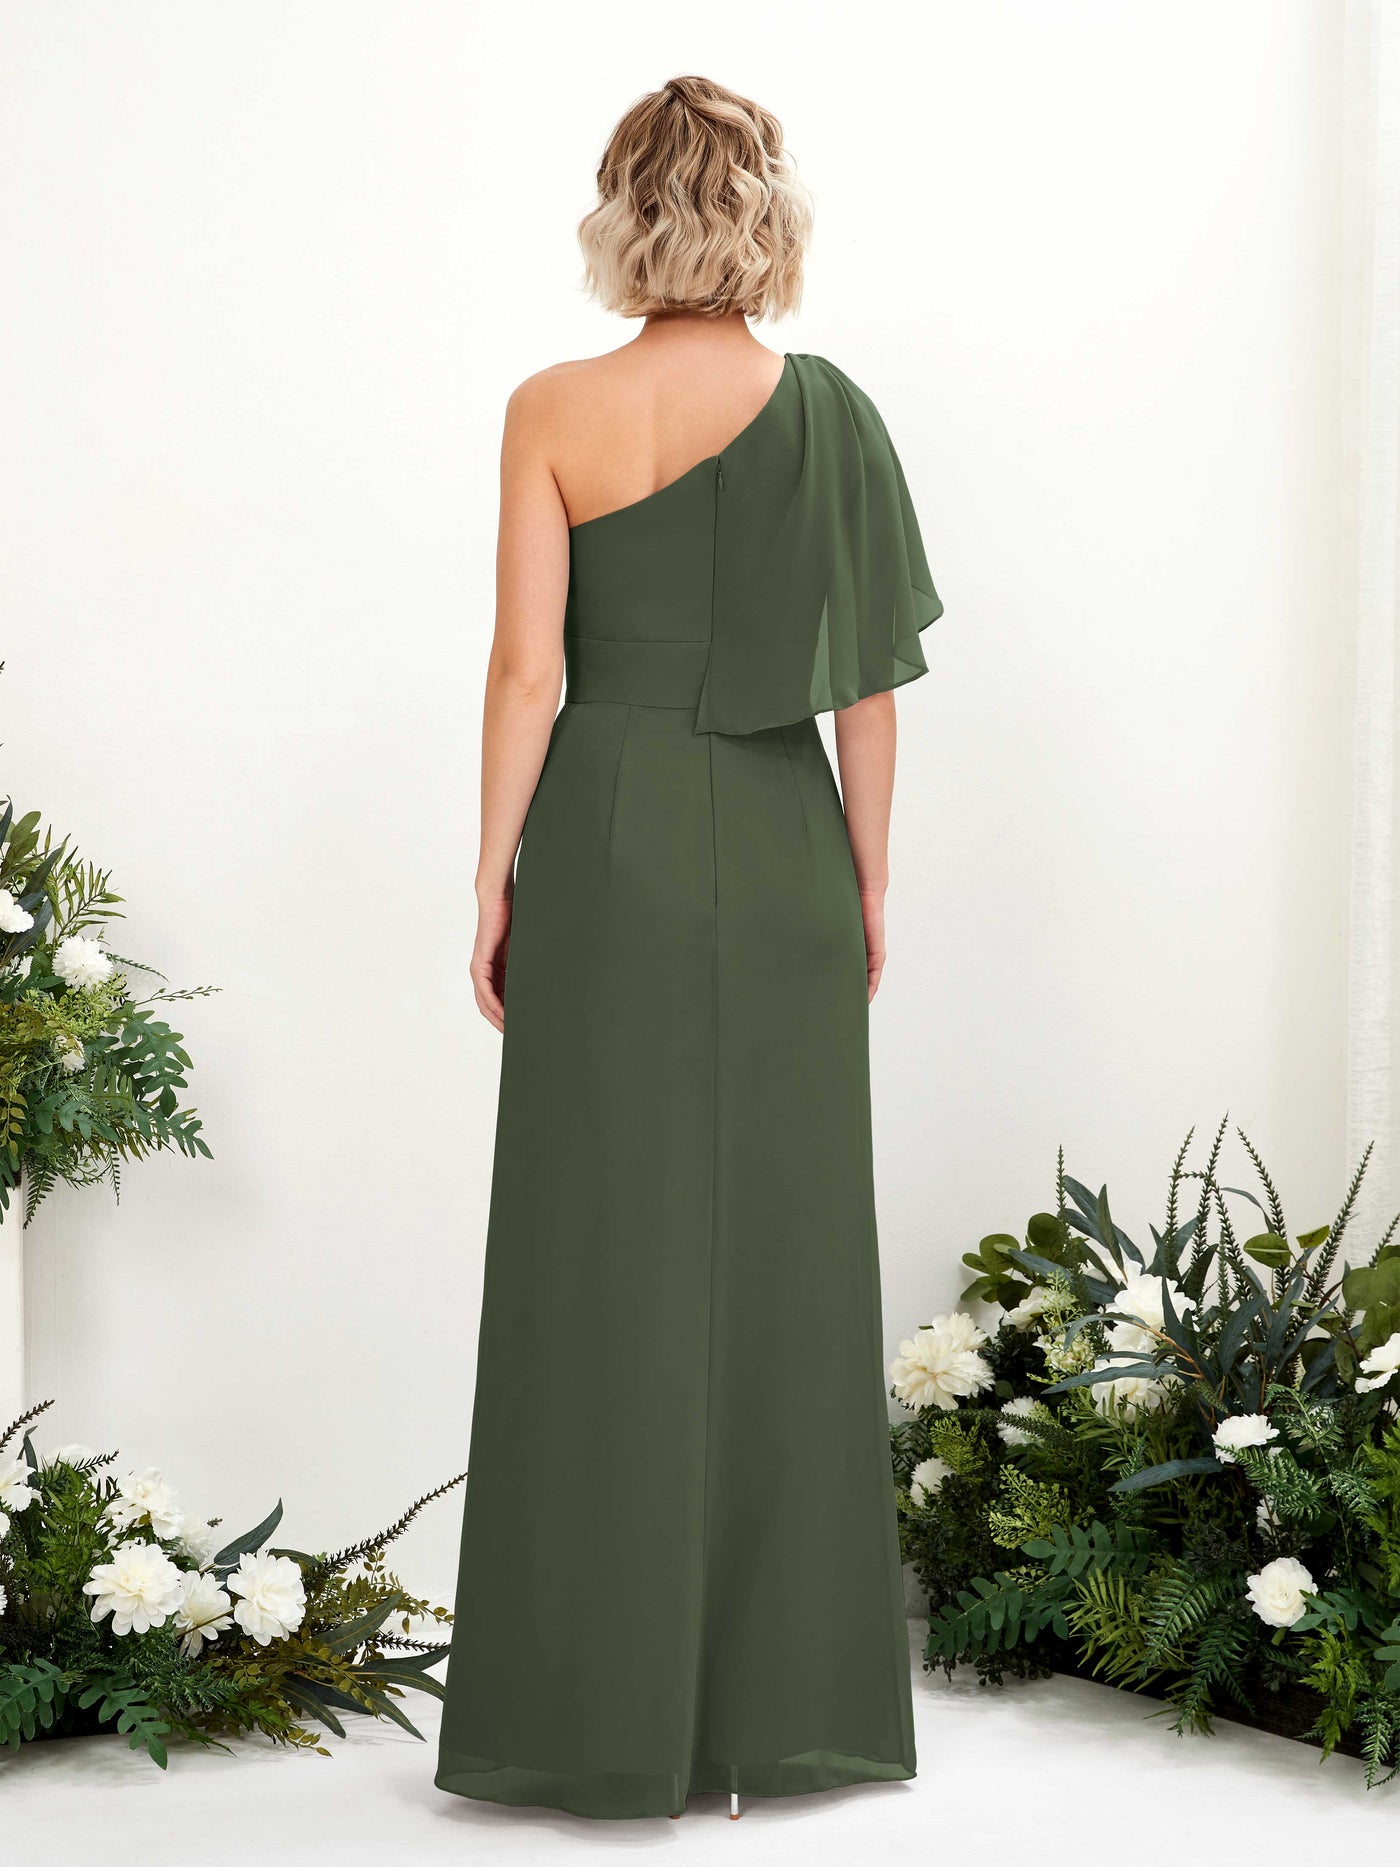 Martini Olive Bridesmaid Dresses Bridesmaid Dress Ball Gown Chiffon Full Length Short Sleeves Wedding Party Dress (81223707)#color_martini-olive